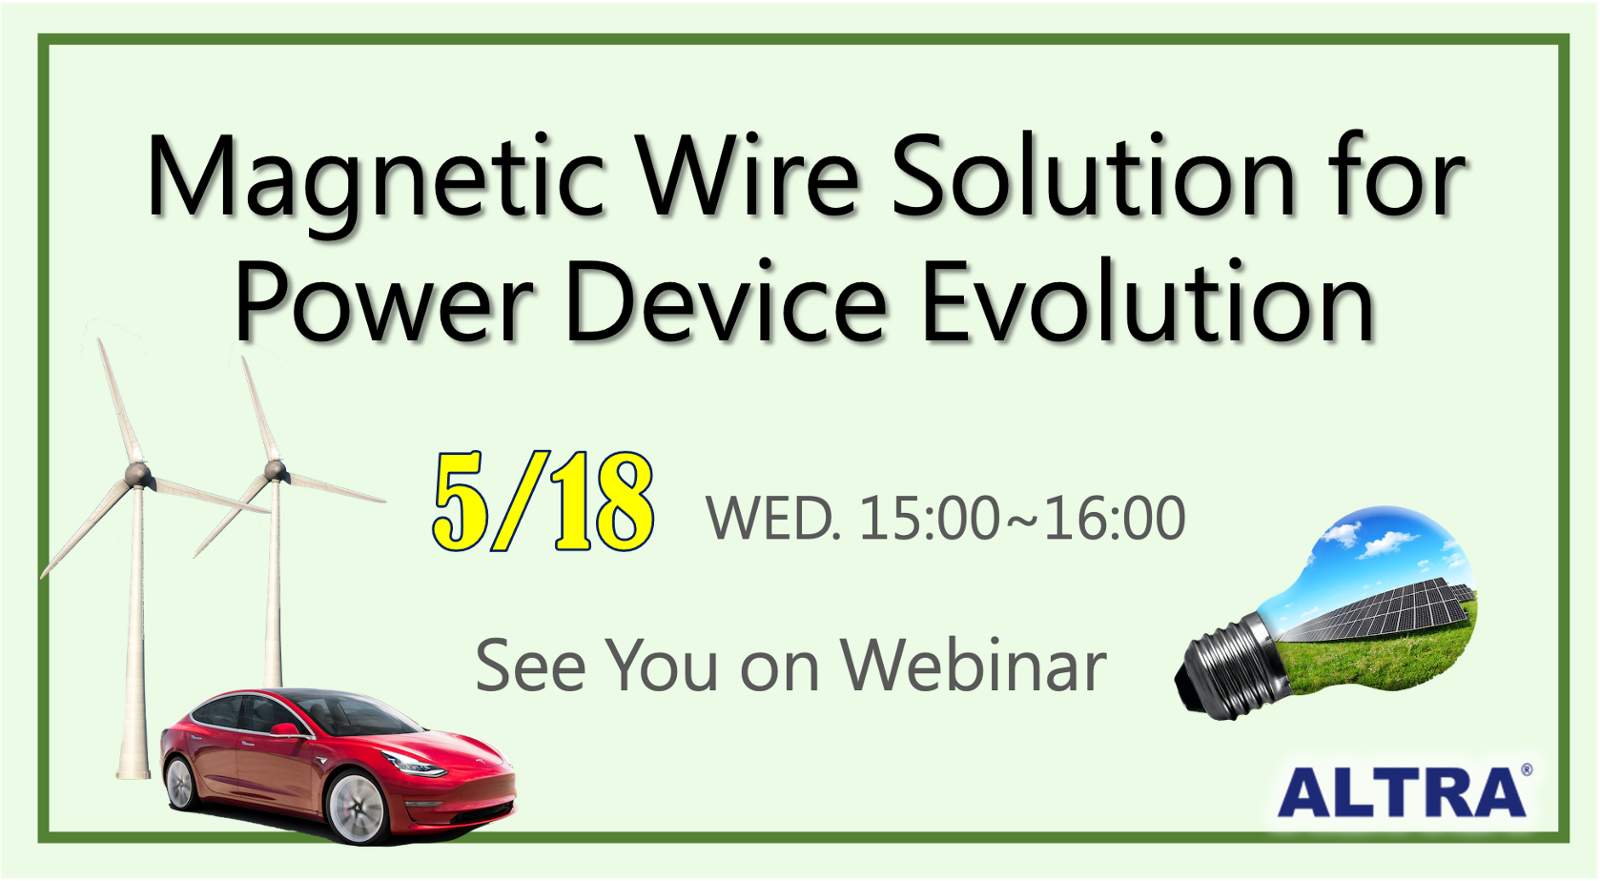 5/18 Webinar: Magnetic Wire Solution for Power Device Evolution